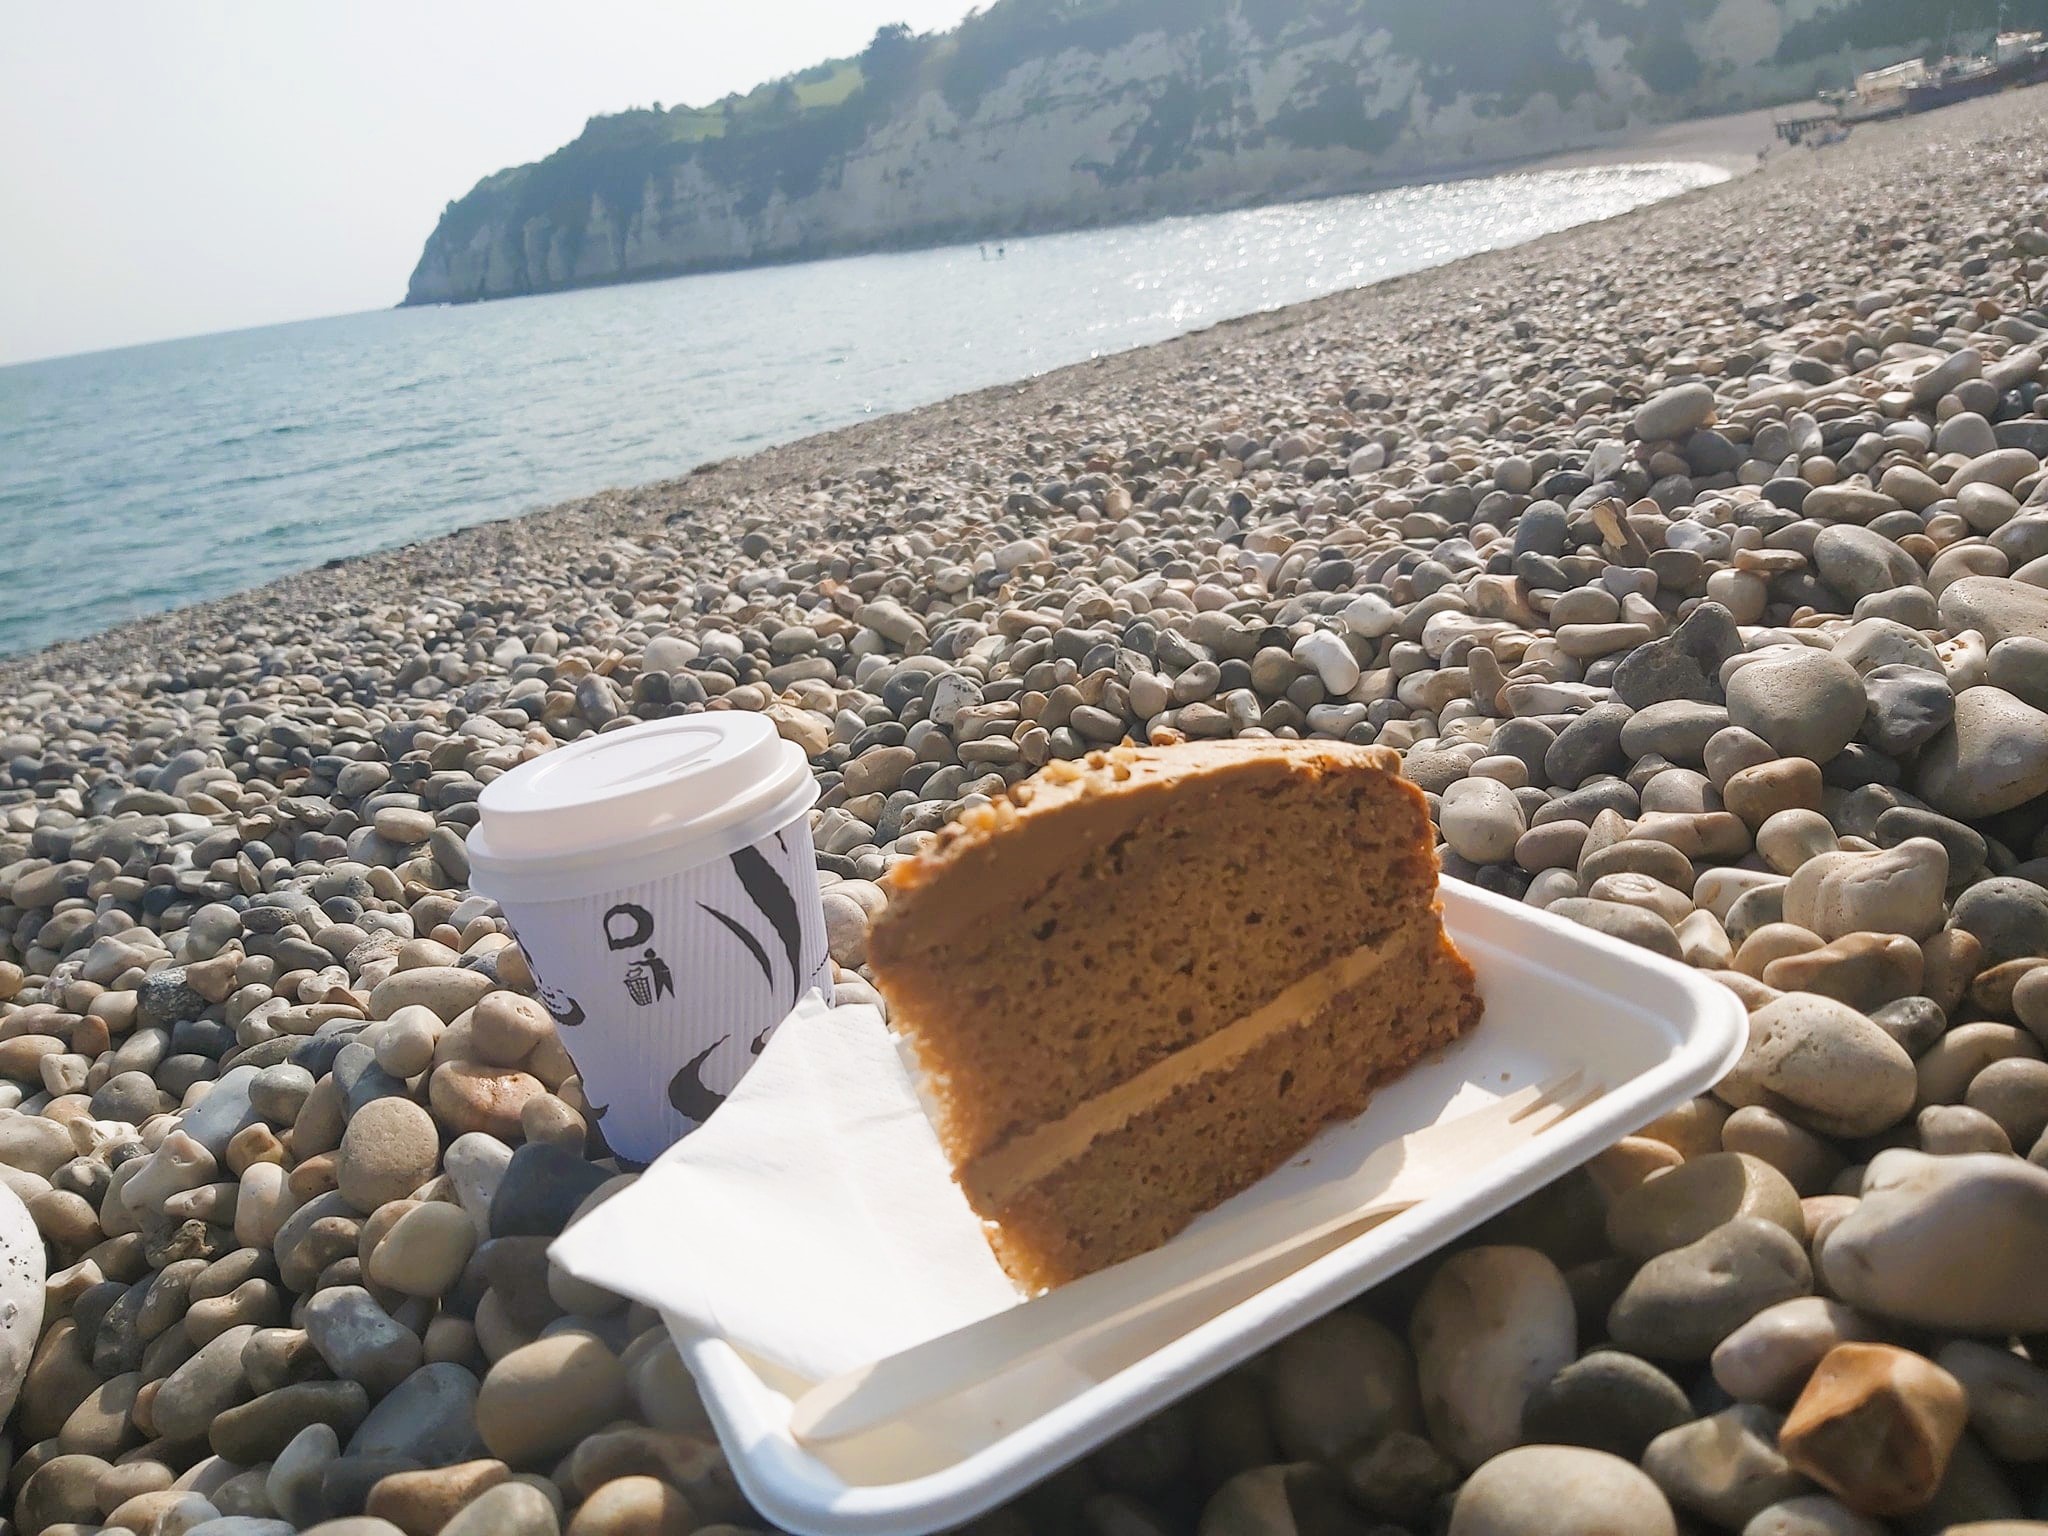 Coffee and cake on the pebbly beach at Beer, Devon, England.